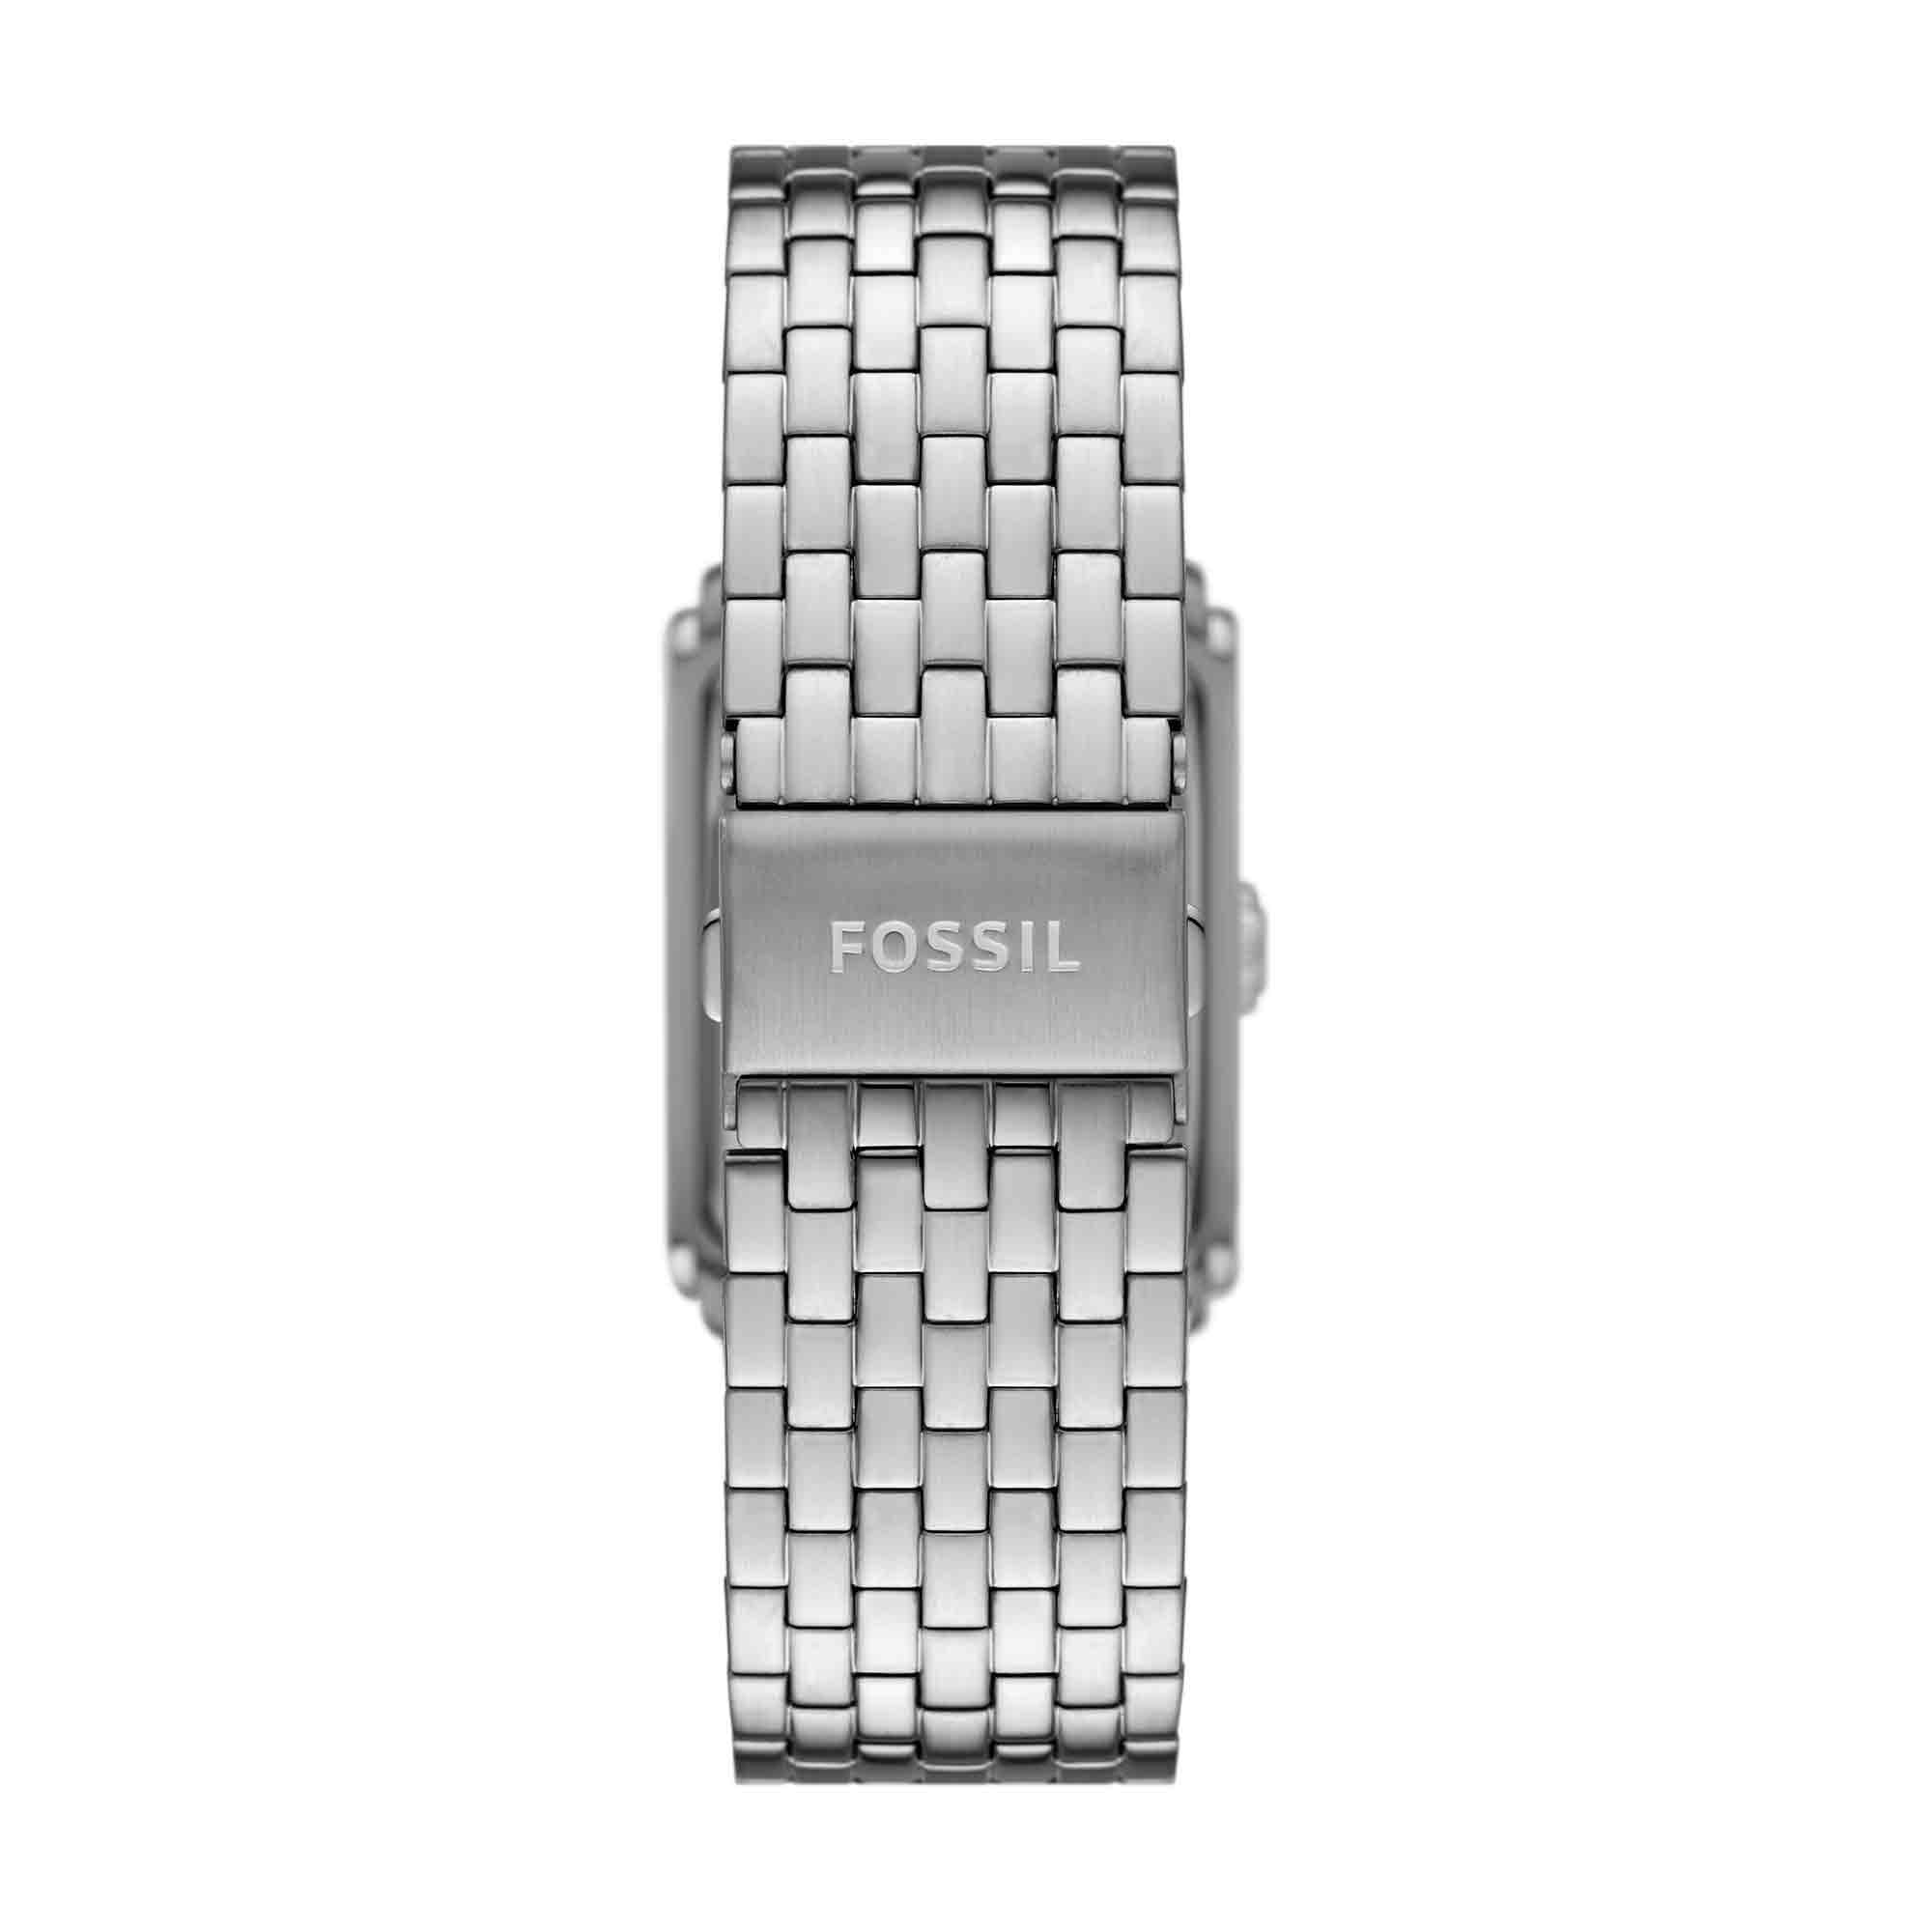 Fossil Carraway Men's Watch with Stainless Steel or Leather Band, Dress Watch for Men